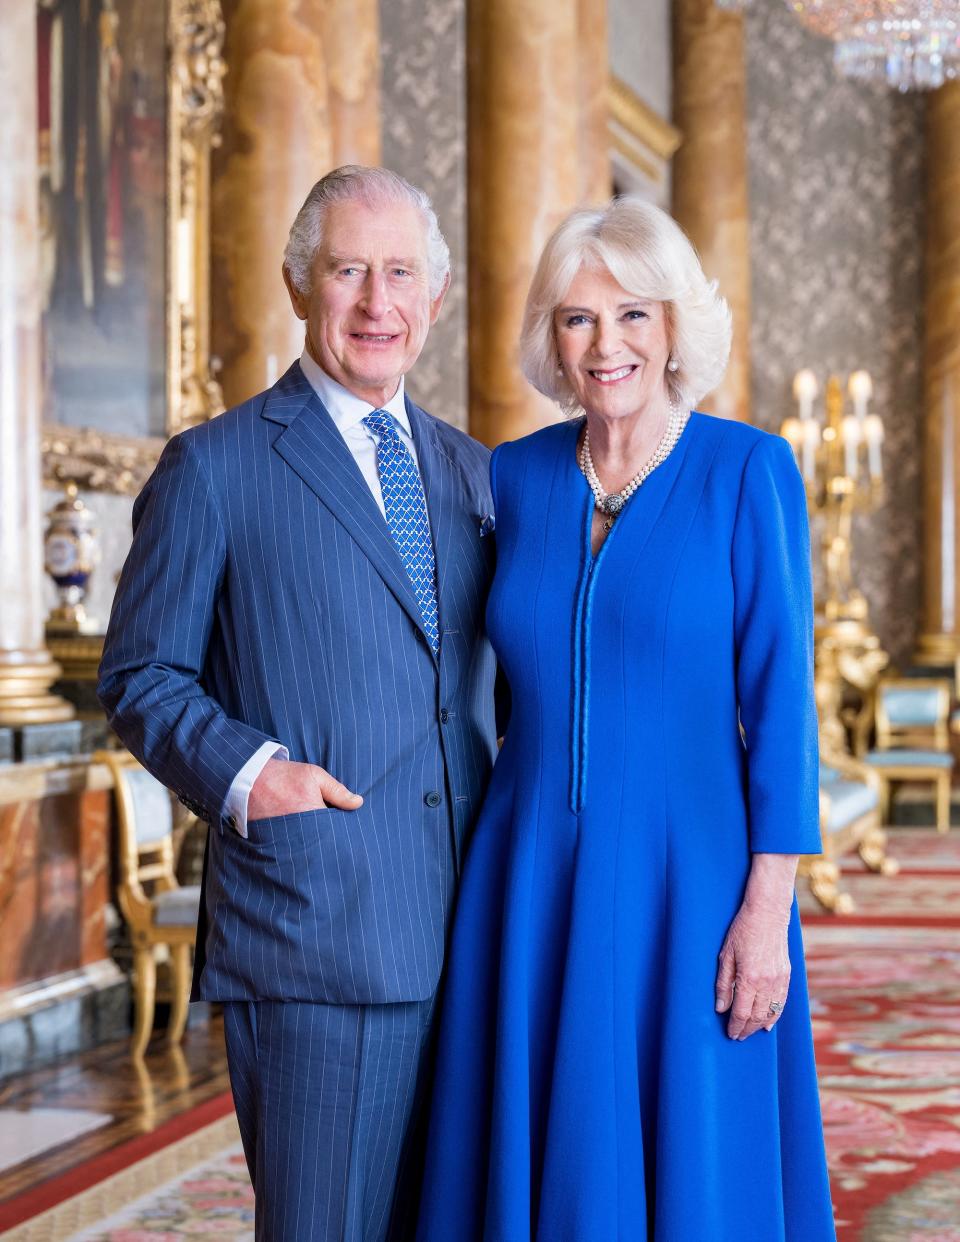 King Charles III and Camilla, Queen Consort, pose for a photo in Buckingham Palace ahead of the coronation.